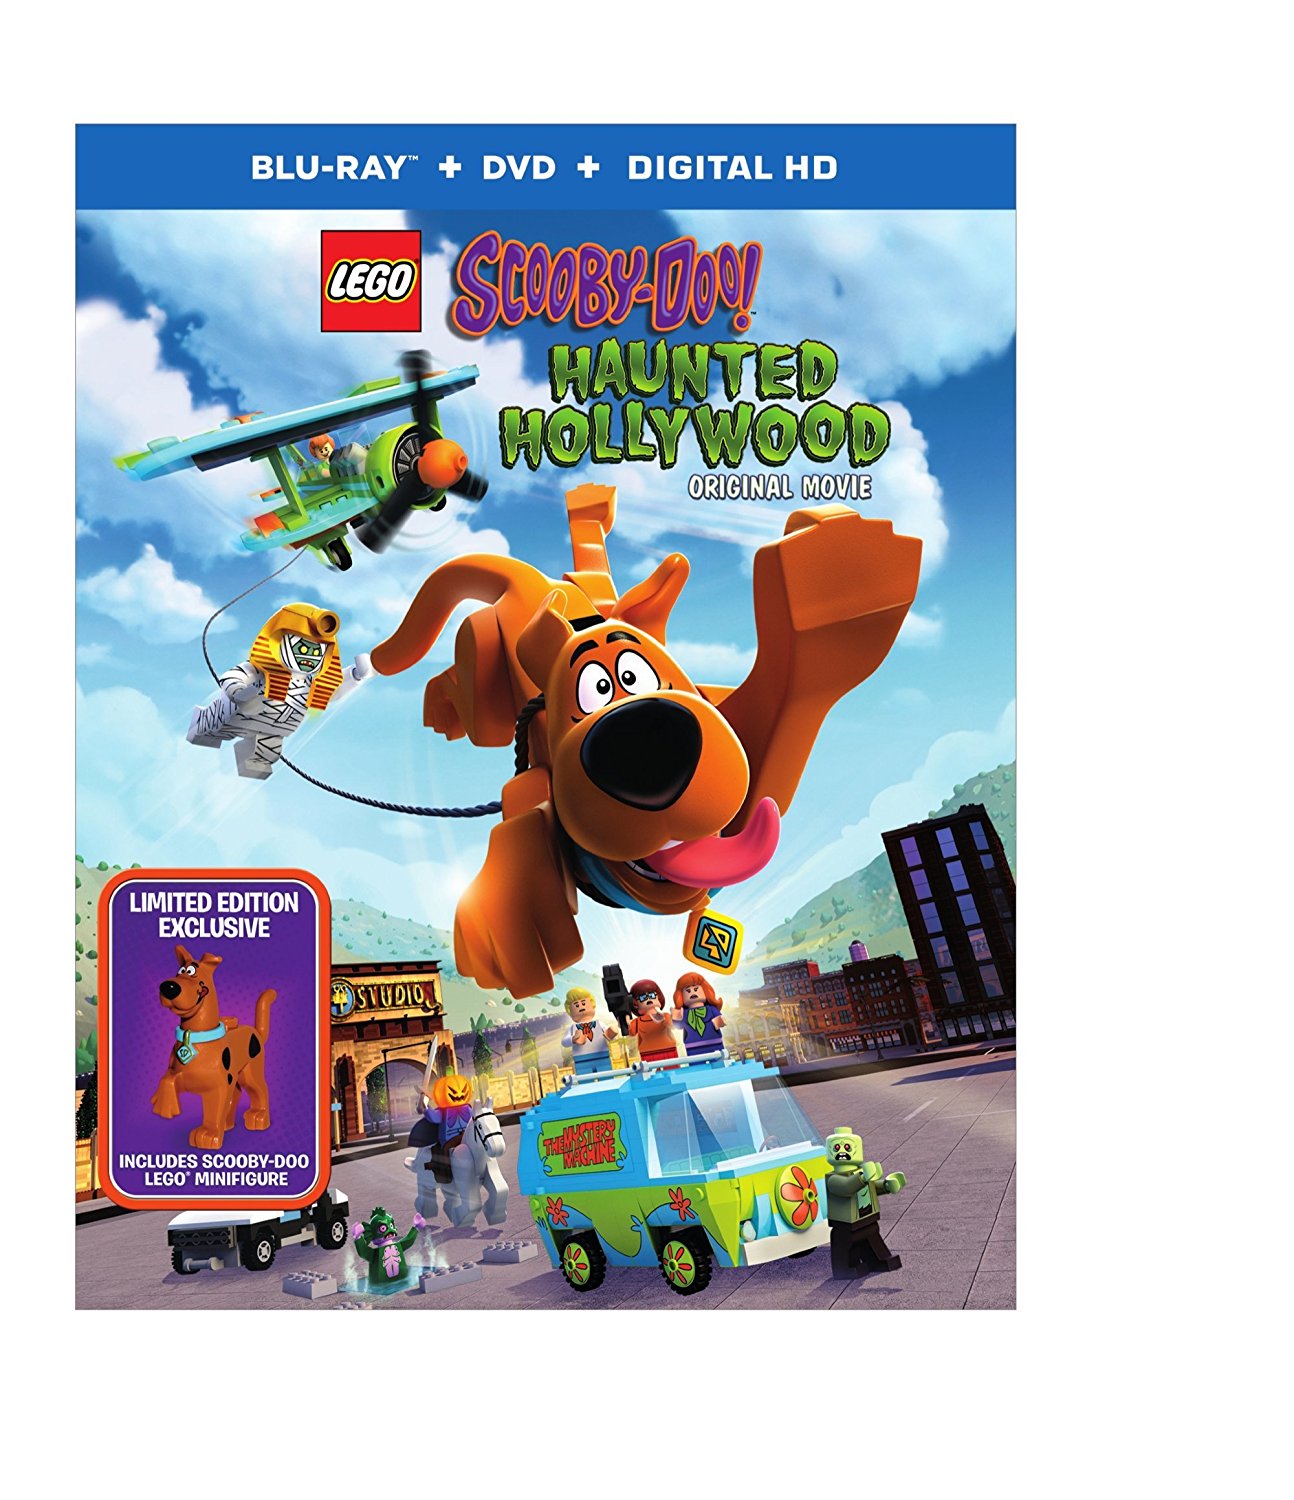 Contest: Win LEGO Scooby-Doo Haunted Hollywood for Halloween! – Movie Mom